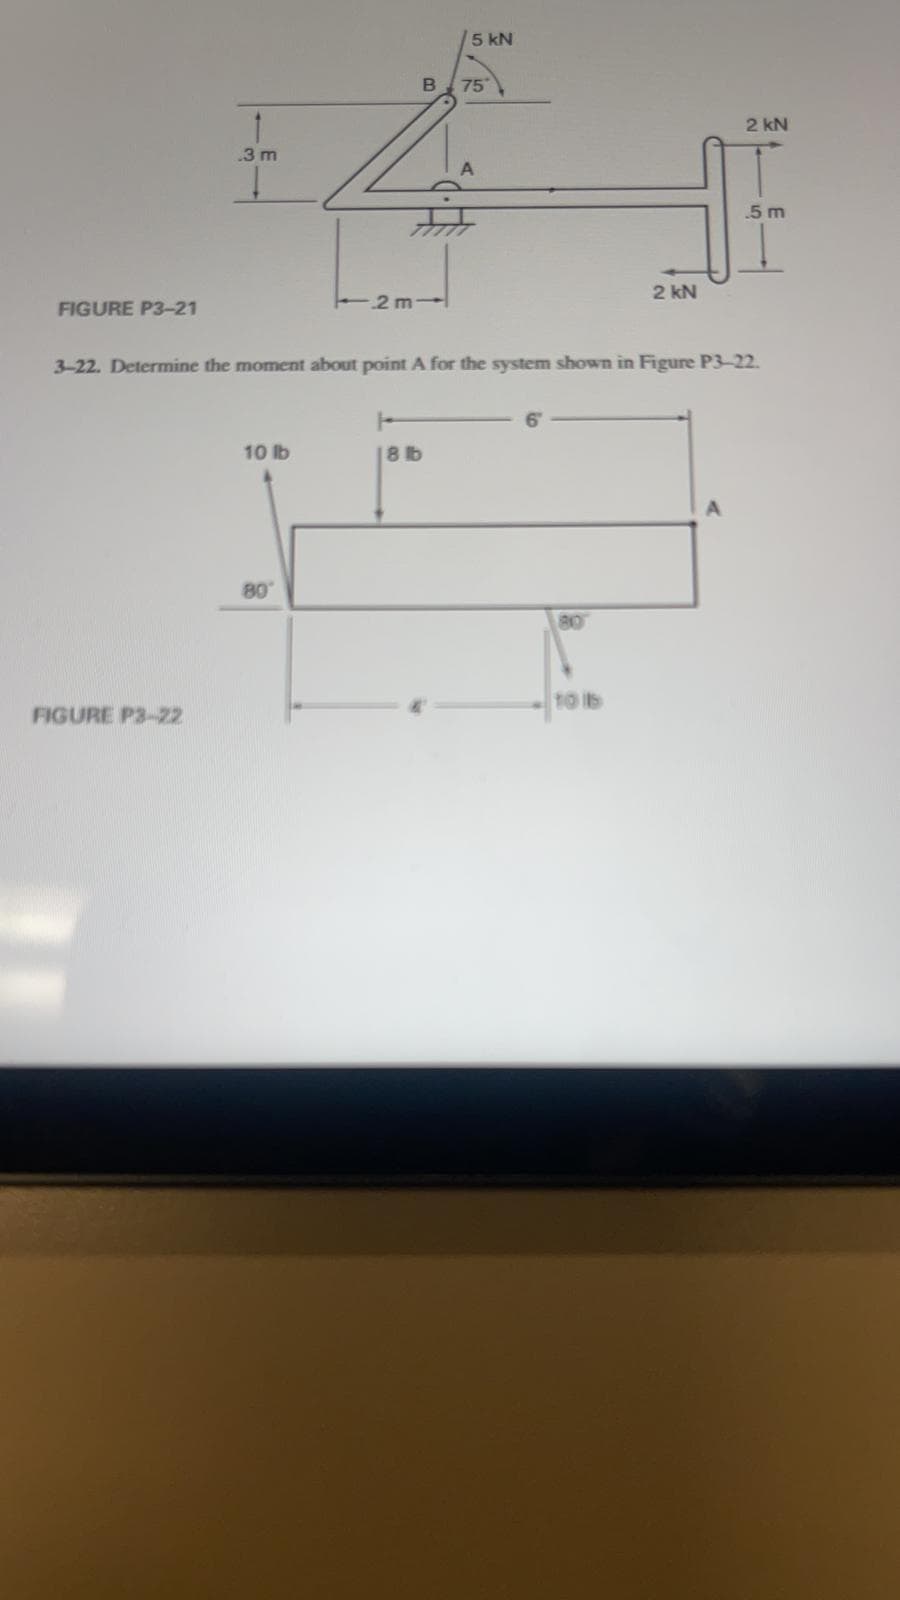 1
3 m
5 kN
B 75
2 kN
.5 m
2 kN
2 m-
FIGURE P3-21
3-22. Determine the moment about point A for the system shown in Figure P3-22.
10 lb
18 b
80°
810
10 16
FIGURE P3-22